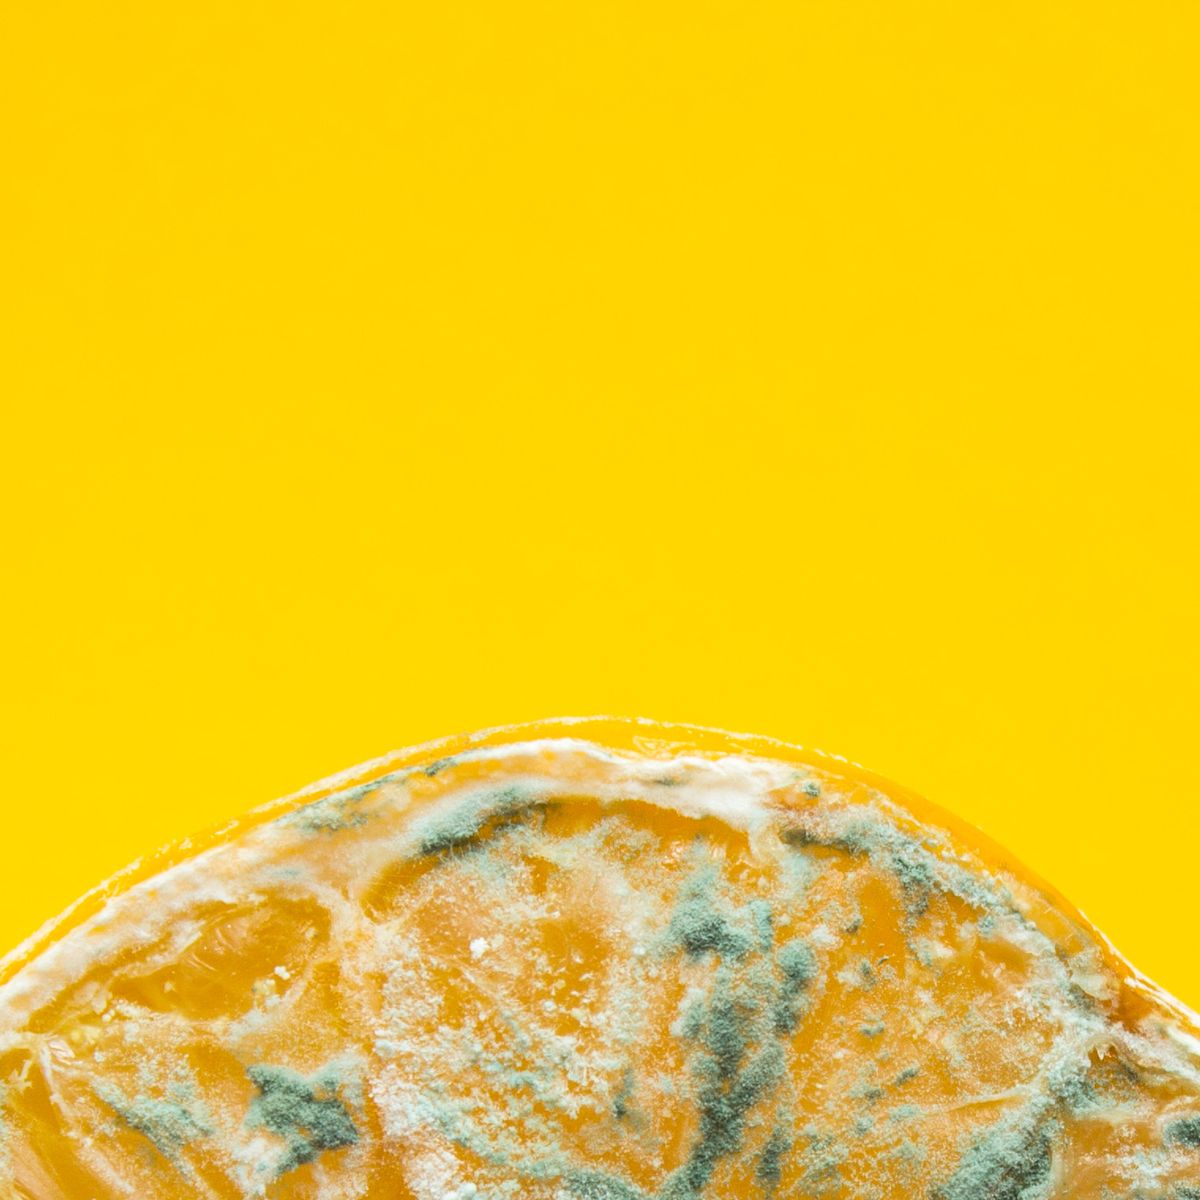 https://hips.hearstapps.com/hmg-prod/images/spoiled-lemon-halves-with-mold-close-up-on-a-yellow-royalty-free-image-1590593466.jpg?crop=0.356xw:0.534xh;0.316xw,0.0457xh&resize=1200:*